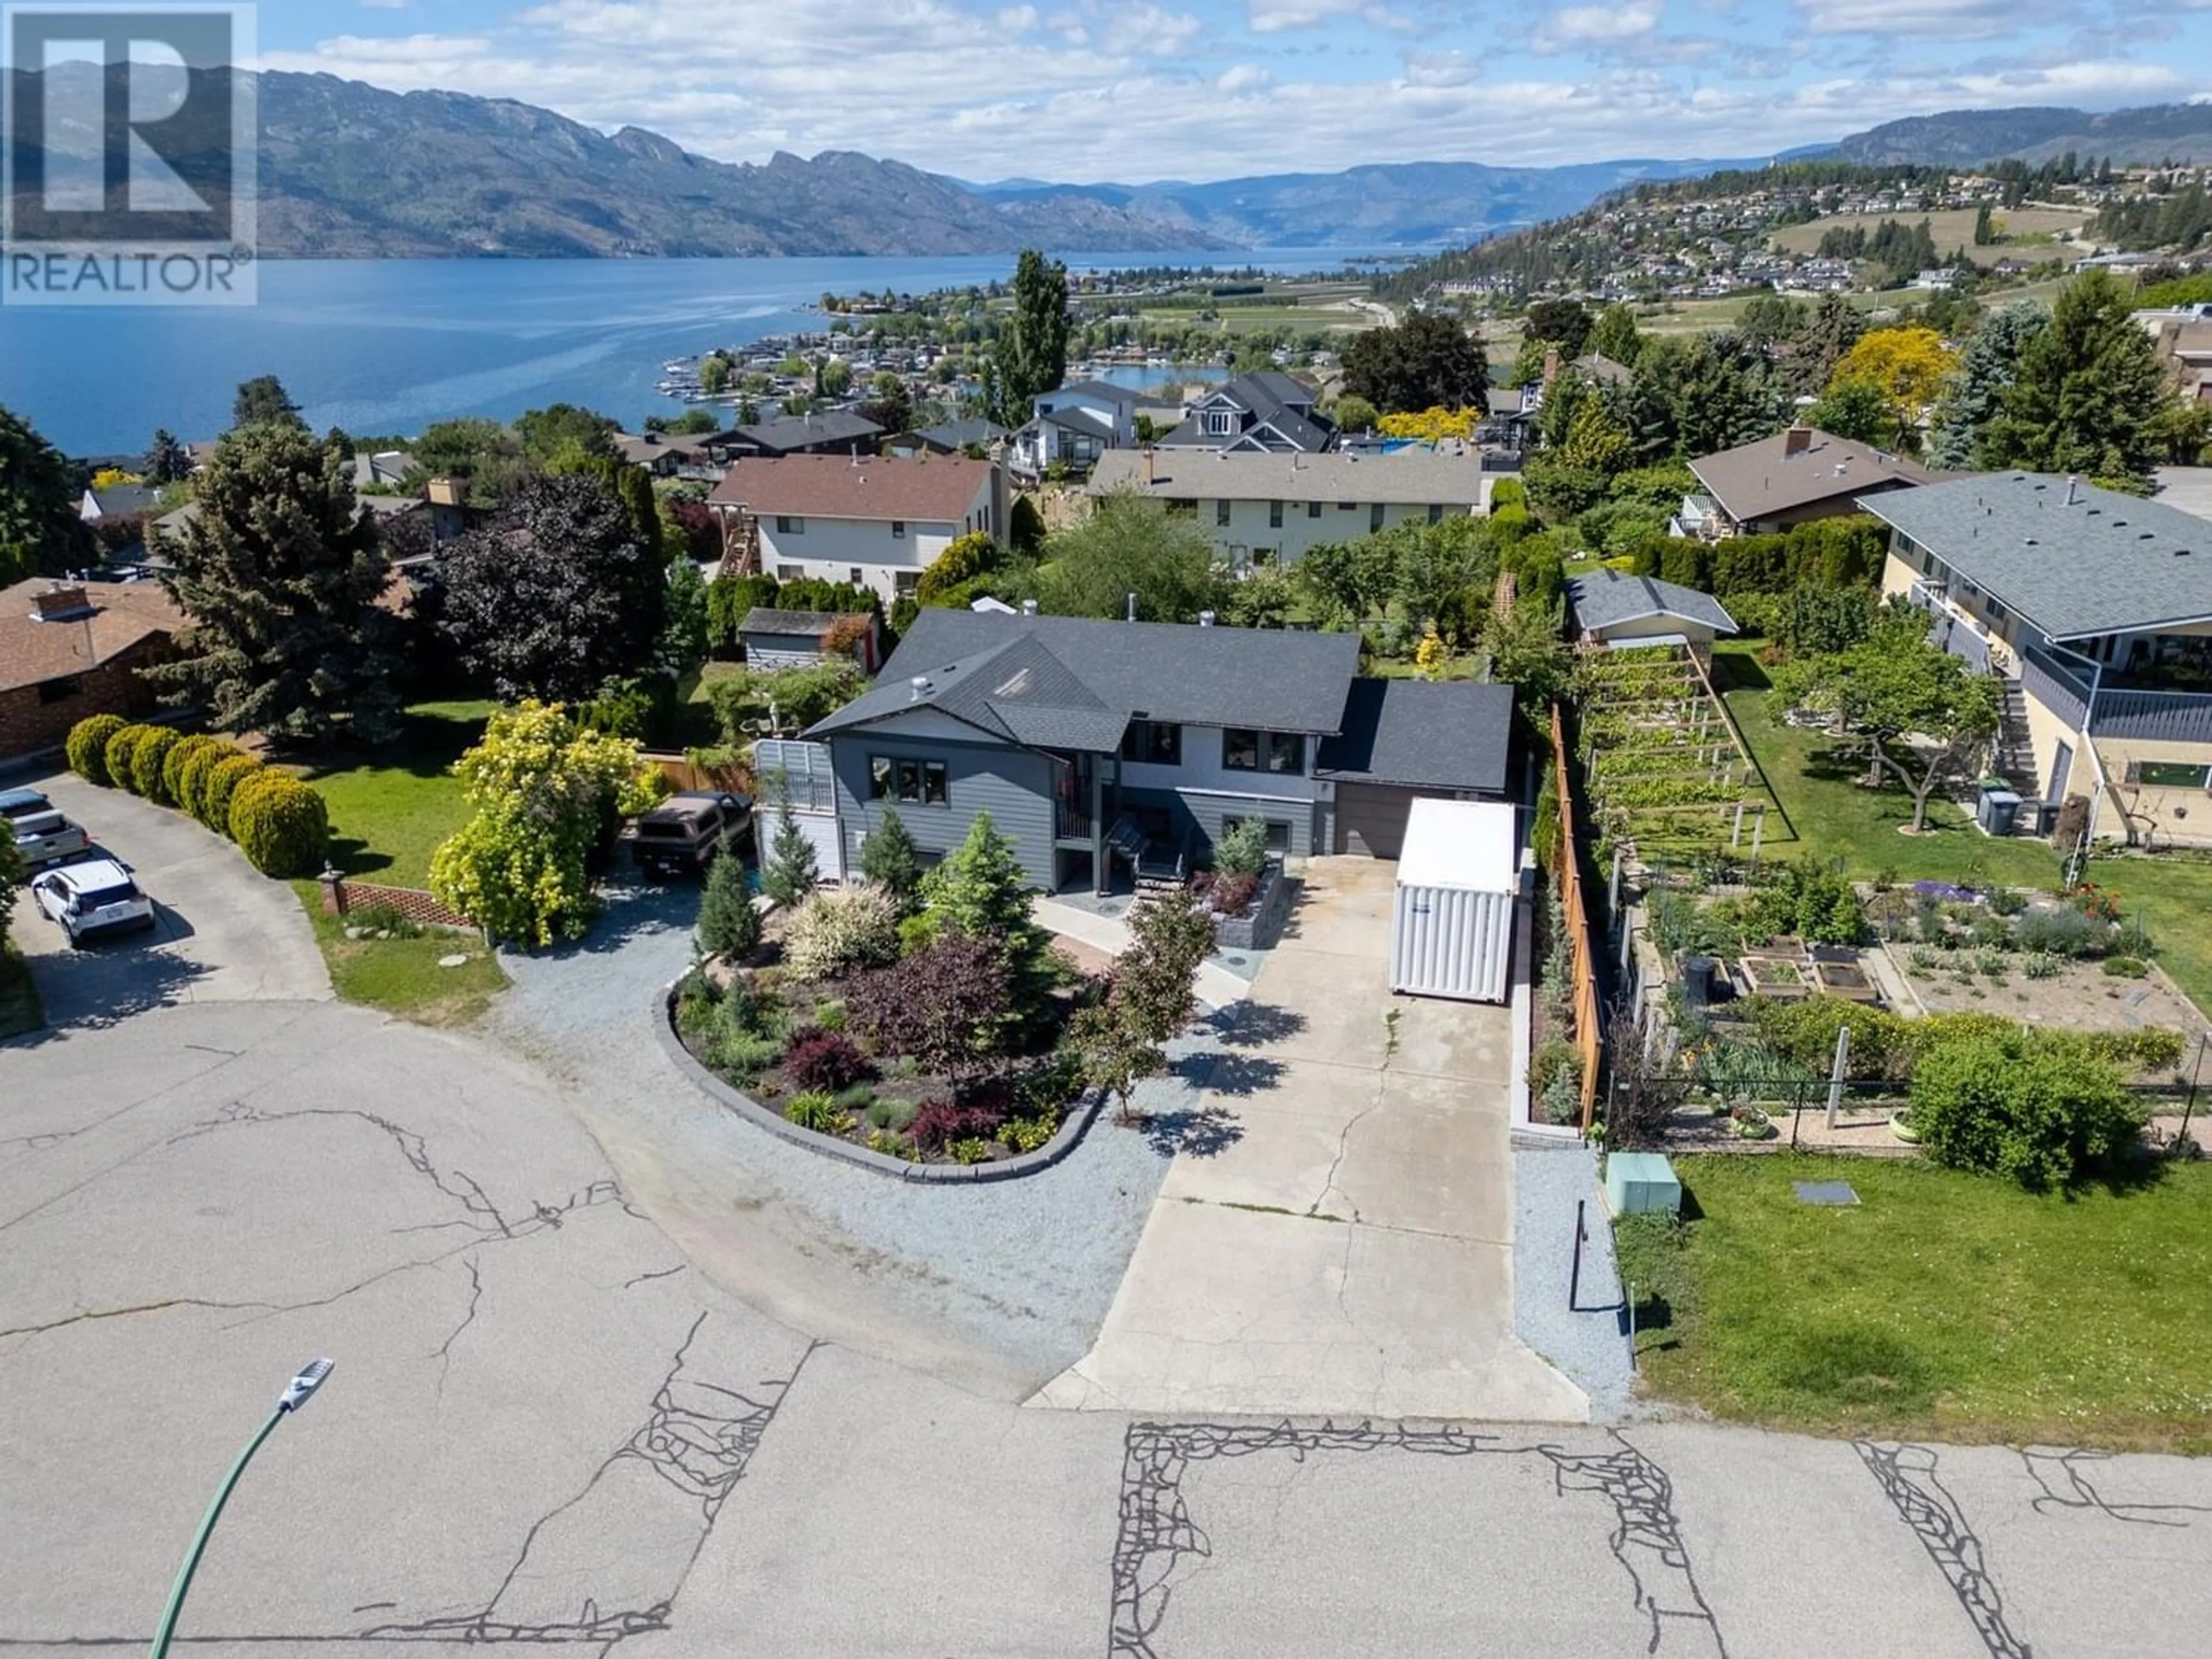 Lakeview for 1141 Perley Road, West Kelowna British Columbia V1Z2T3